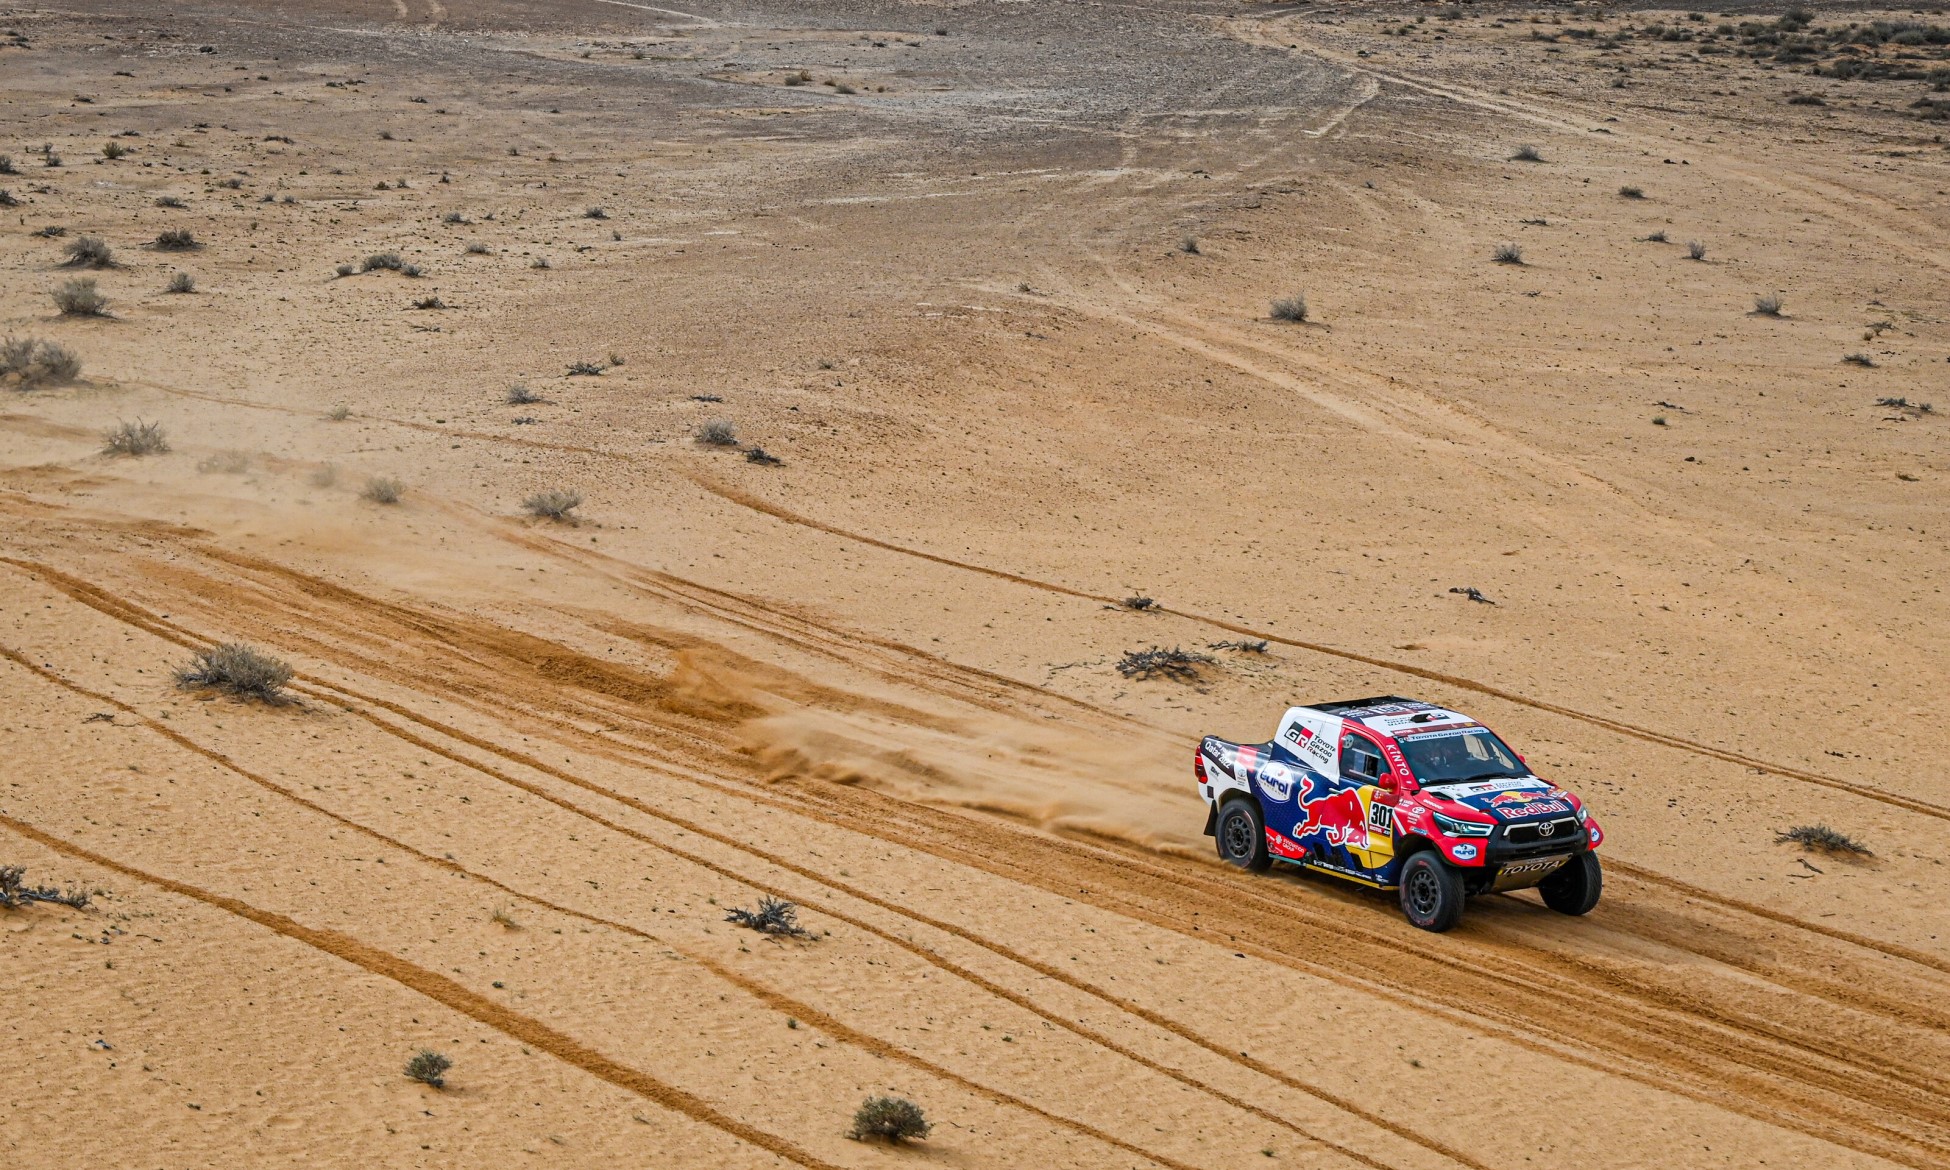 Nasser Al-Attiyah claimed his fifth stage win on 2021 Dakar Stage 8